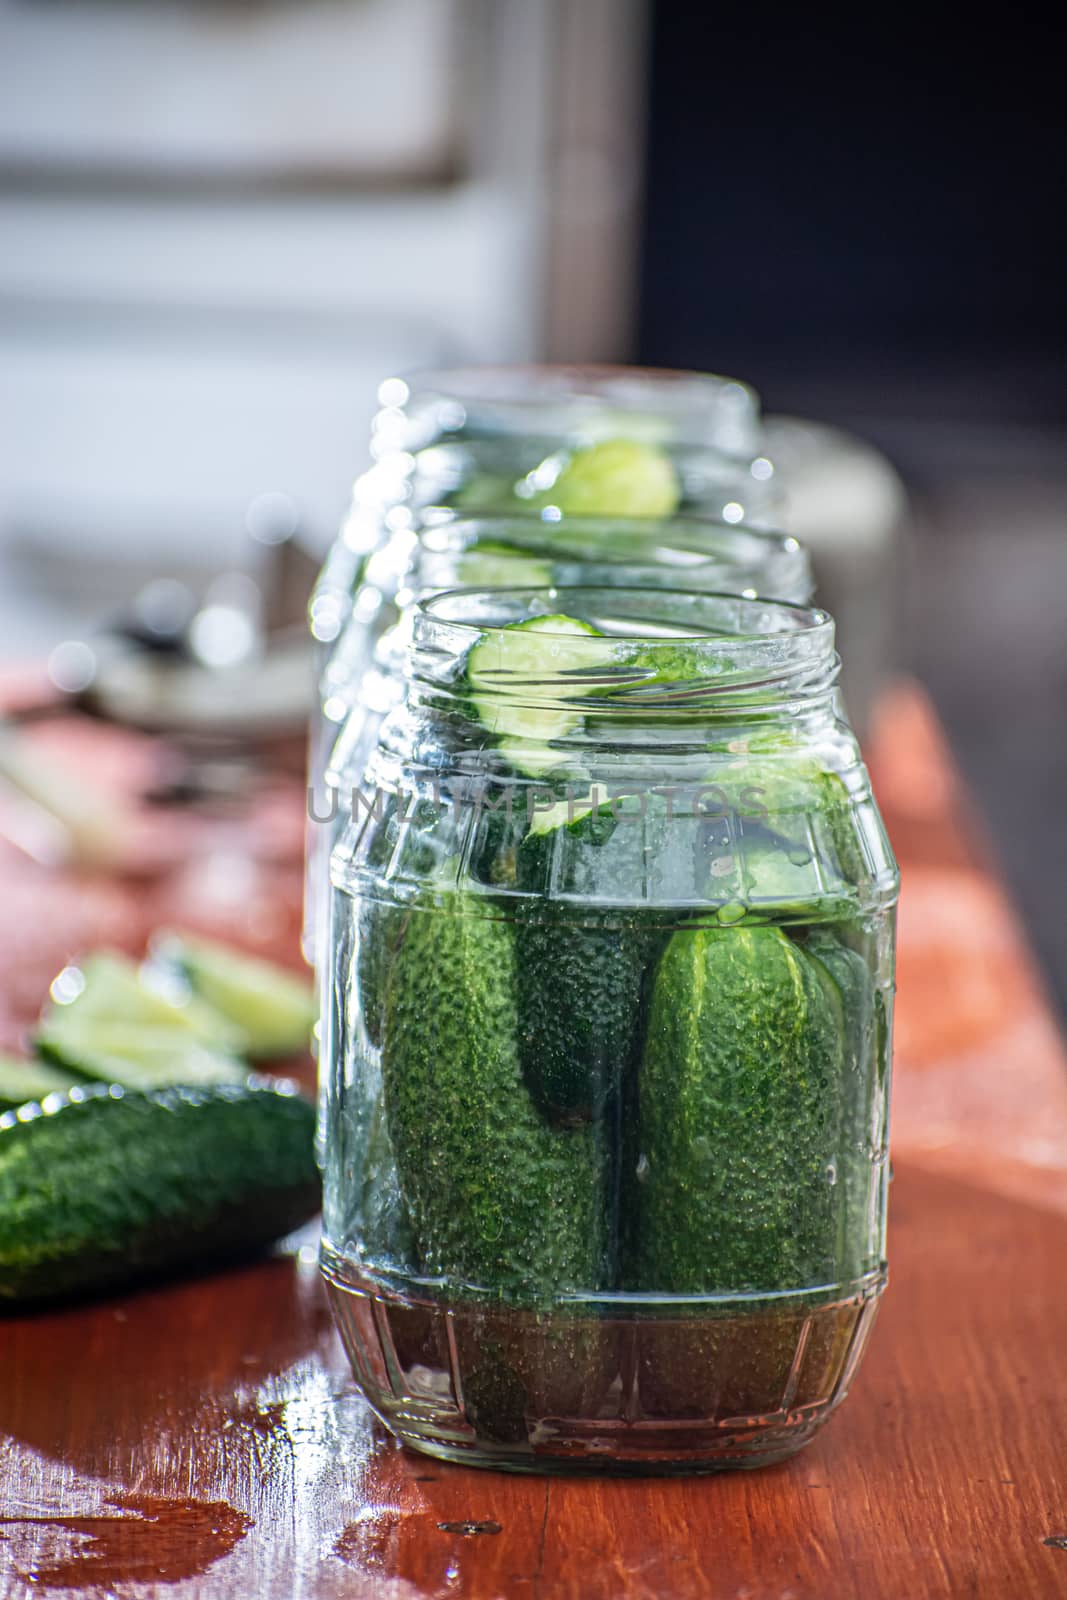 cucumbers in jars, the process of making pickled gherkins